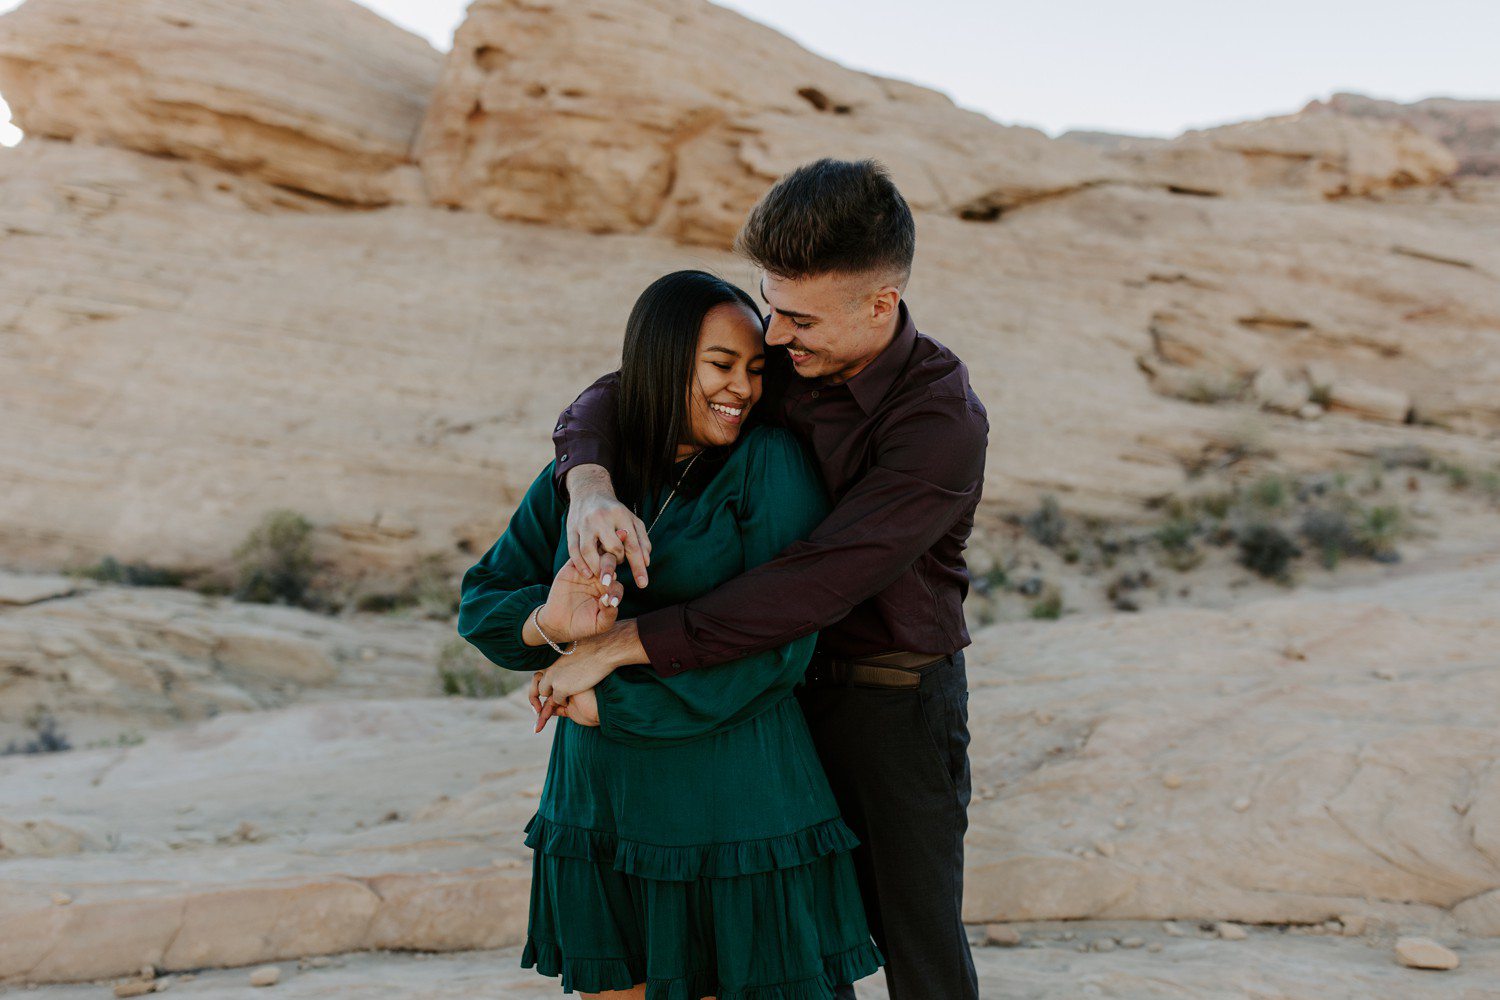 Las Vegas engagement photos at Valley of Fire.